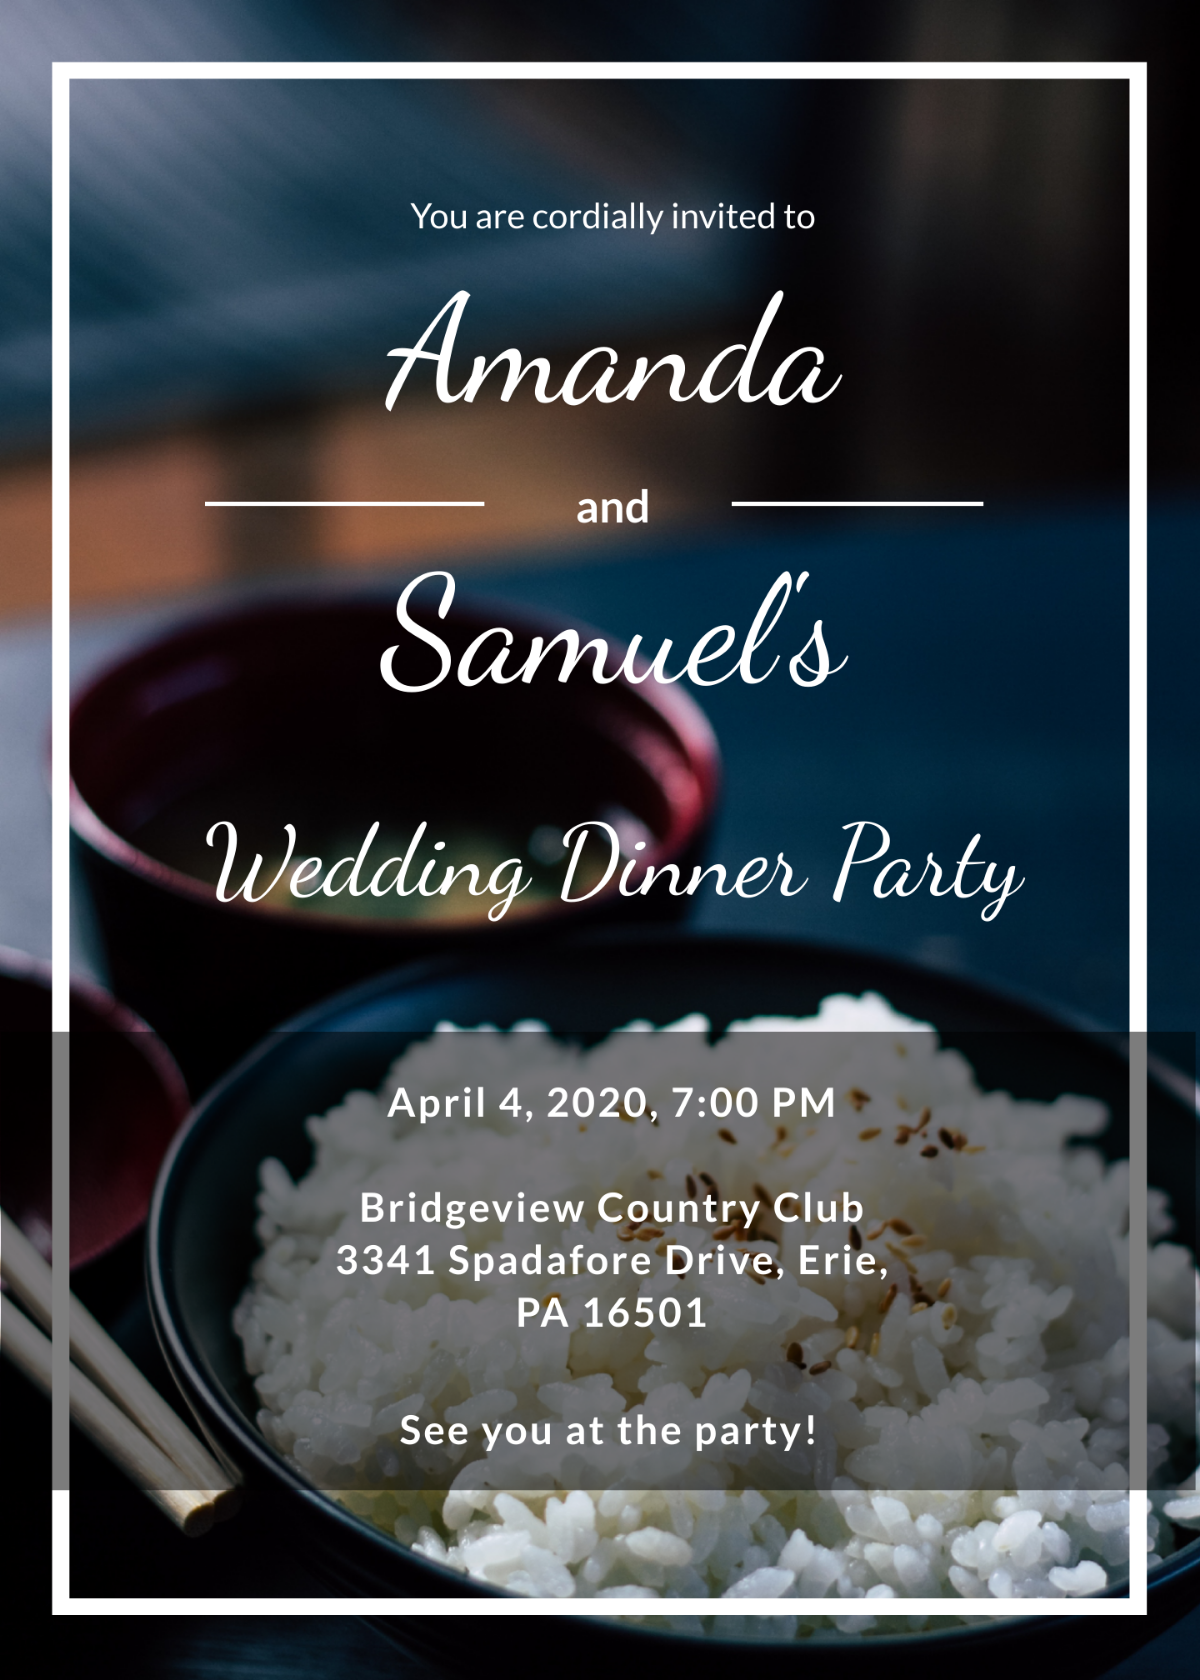 Wedding Dinner Party Invitation Template